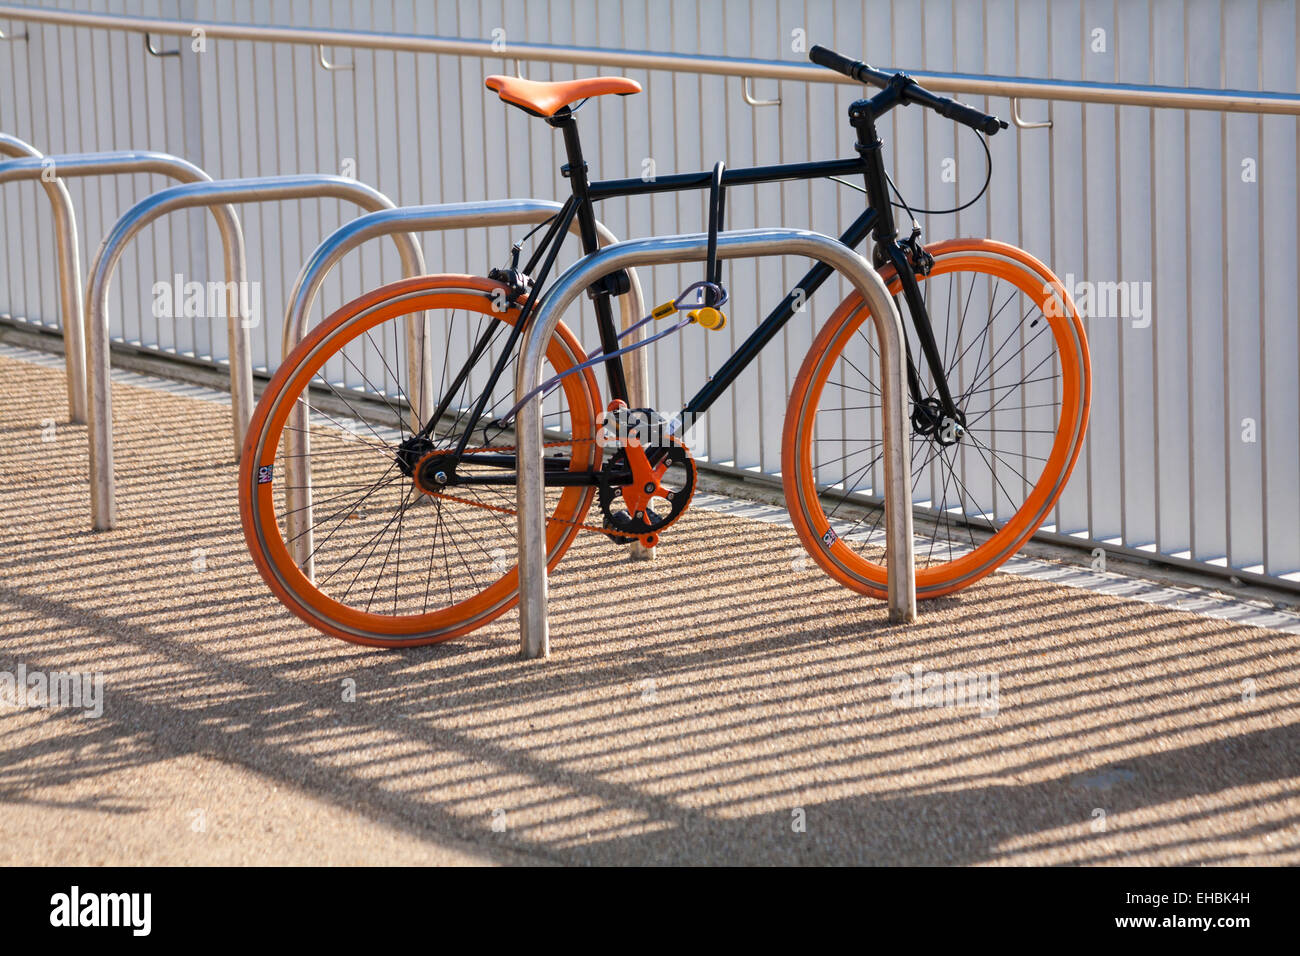 No logo bicycle secured with railings and shadows Stock Photo